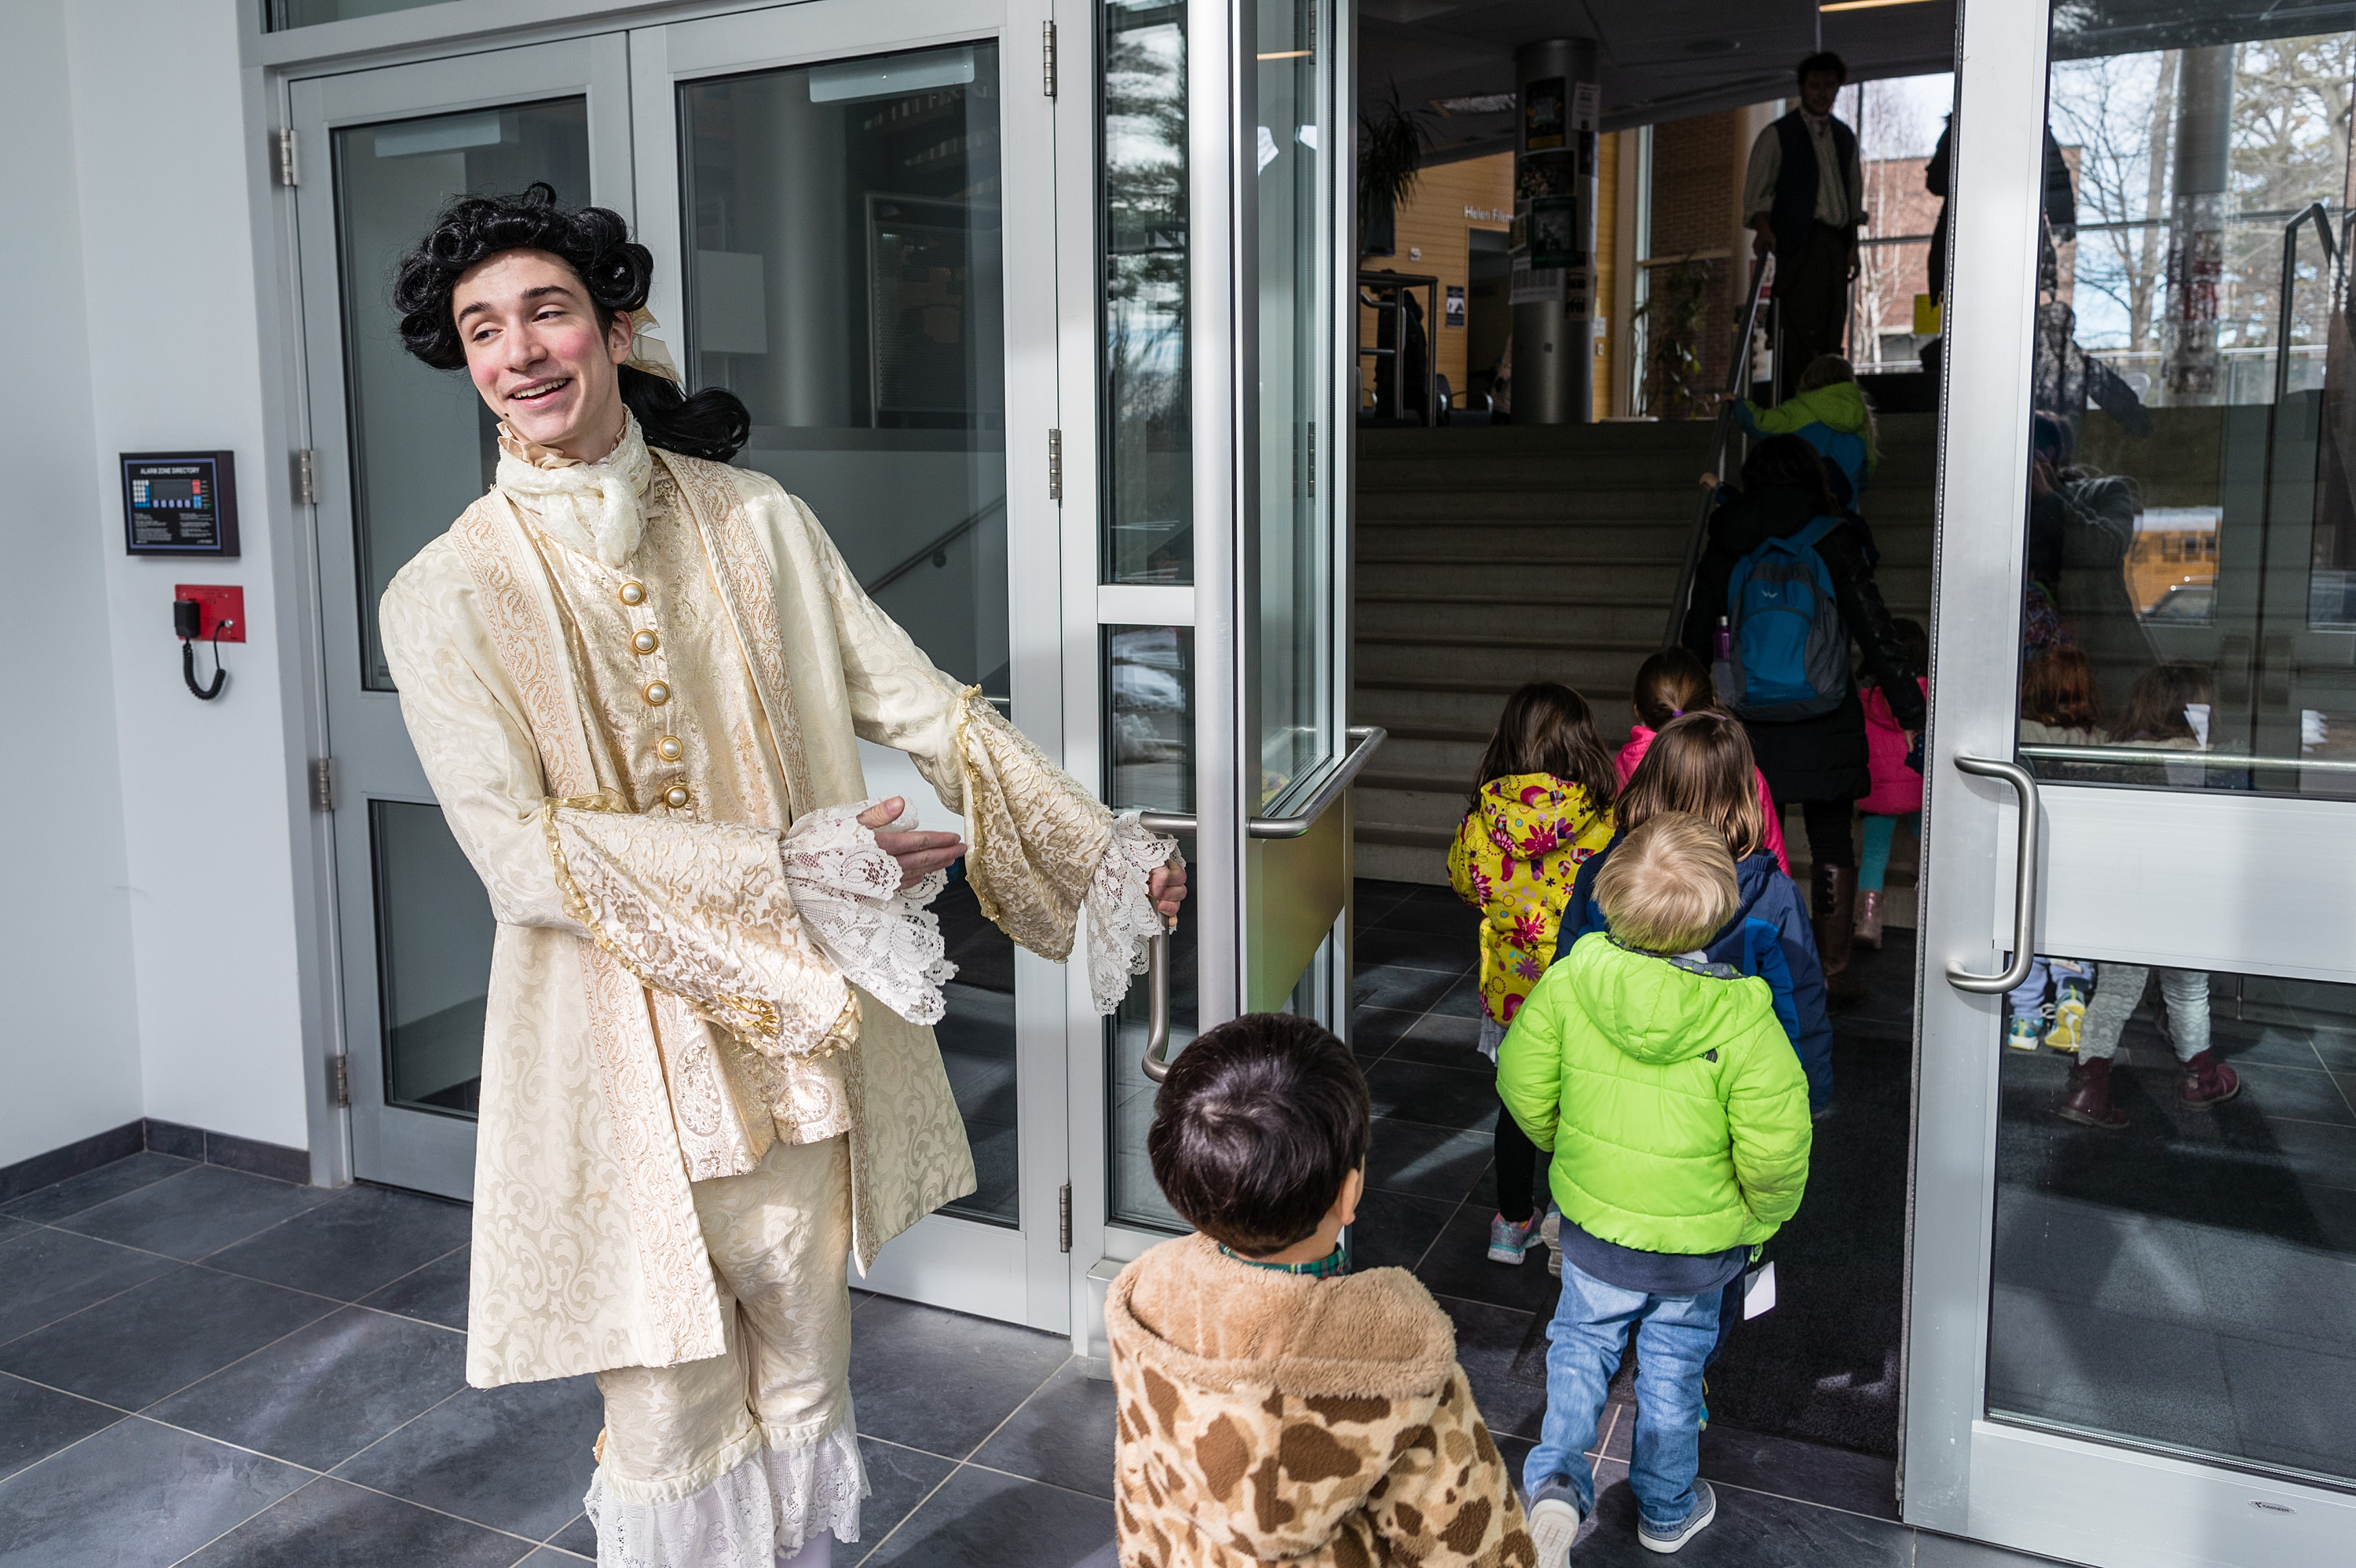 Kids' Showing of Marriage of Figaro, Act II (full-scale), Spring 2018